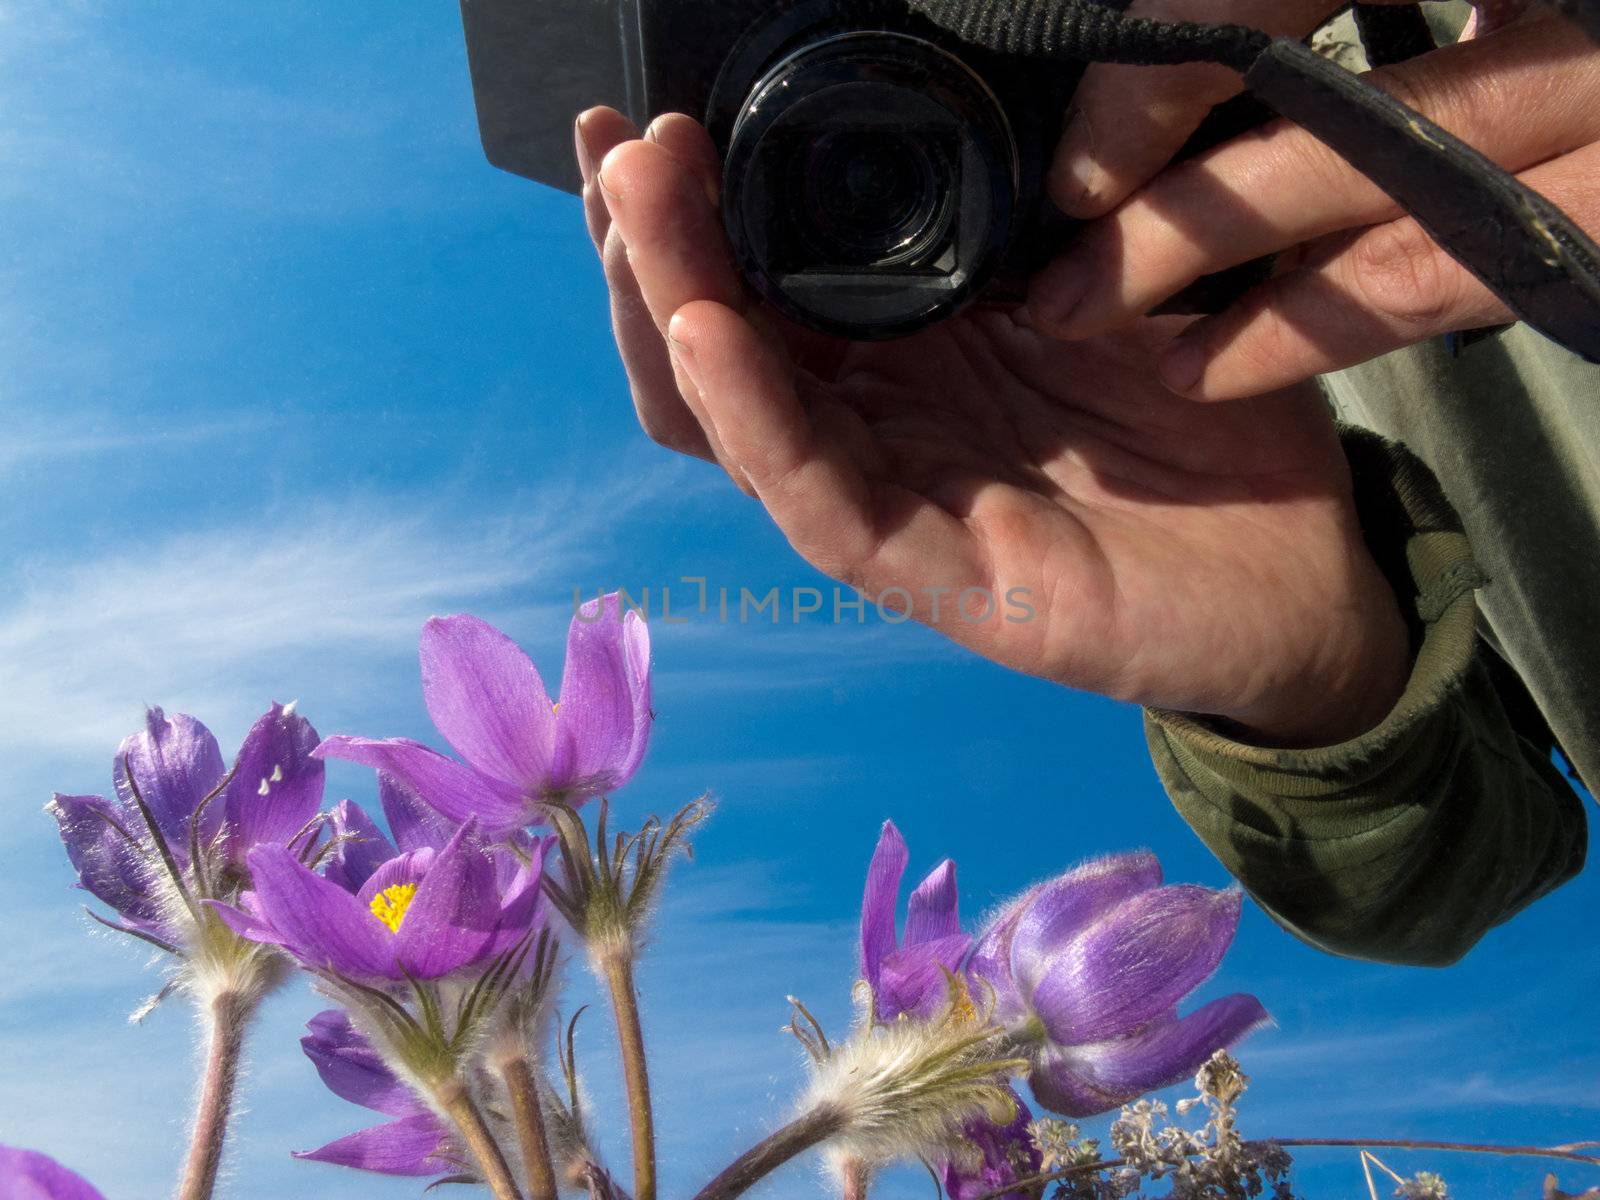 Photographer taking close-up pictures of blooming Pasque Flowers (Pulsatilla patens) with digital camera.